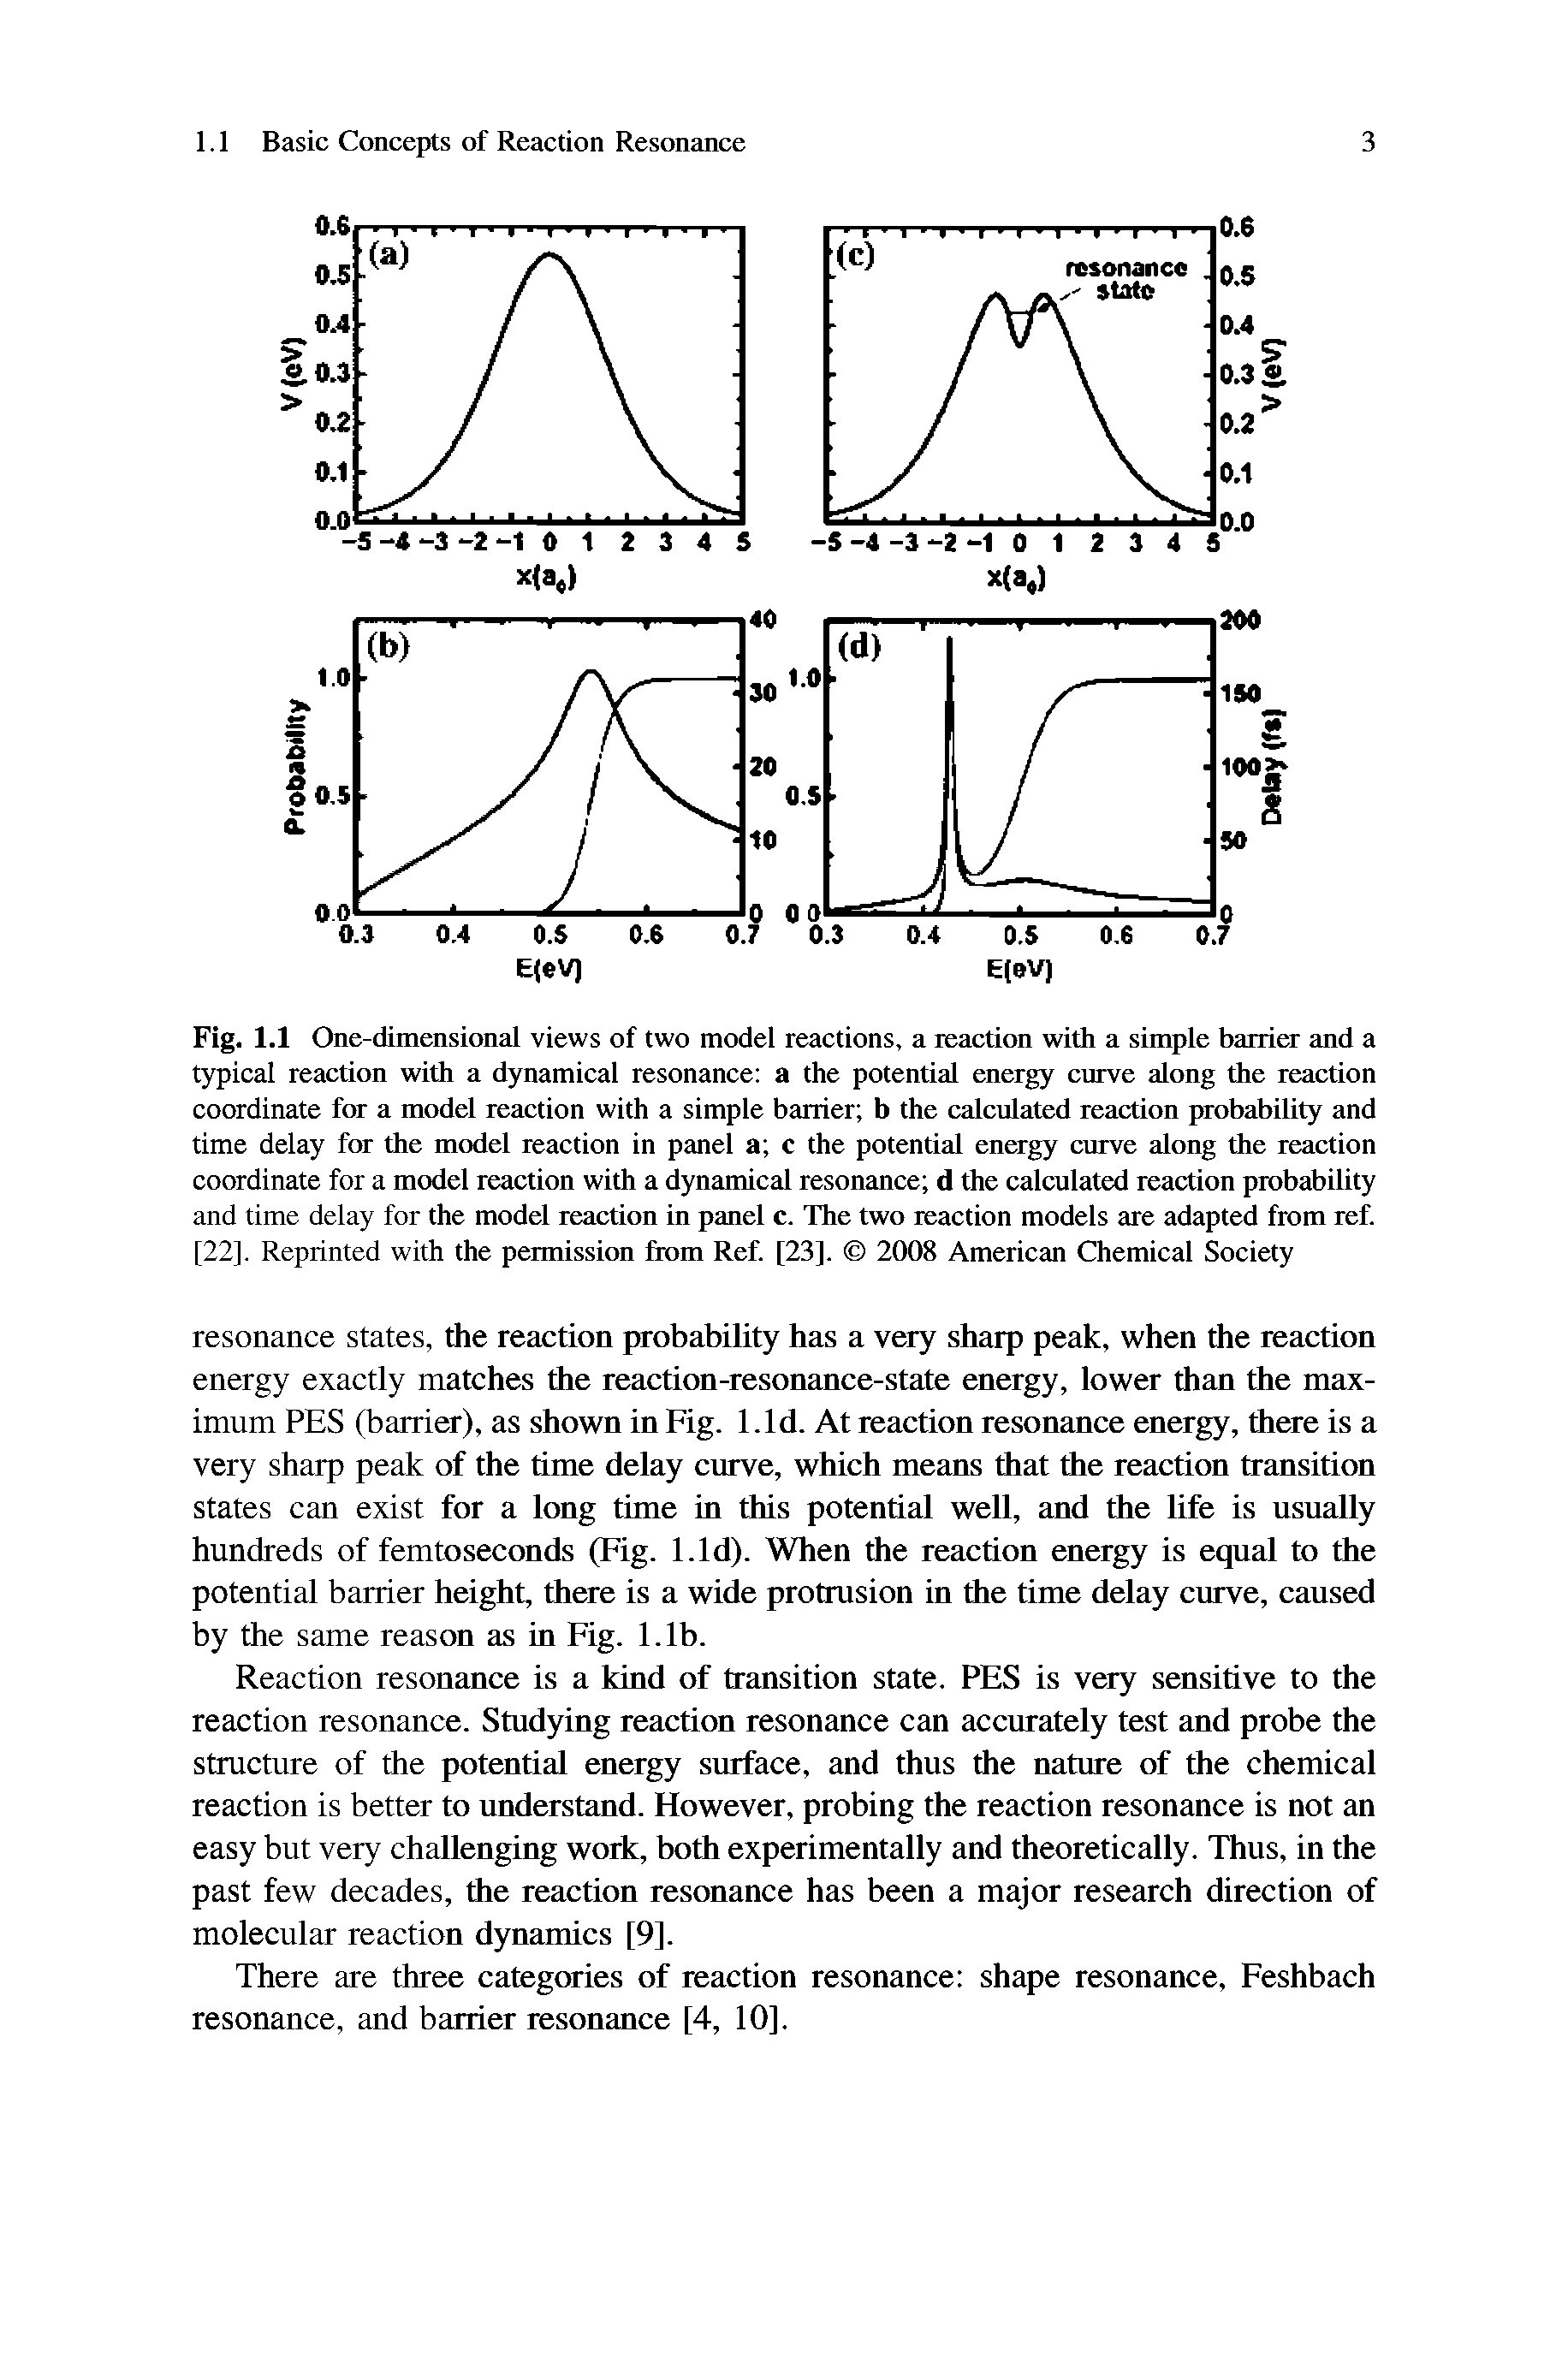 Fig. 1.1 One-dimensional views of two model reactions, a reaction with a simple barrier and a typical reaction with a dynamical resonance a the potential energy curve along the reaction coordinate for a model reaction with a simple barrier b the calculated reaction probability and time delay for the model reaction in panel a c the potential energy curve along the reaction coordinate for a model reaction with a dynamical resonance d the calculated reaction probability and time delay for the model reaction in panel c. The two reaction models are adapted from ref. [22], Reprinted with the permission from Ref. [23]. 2008 American Chemical Society...